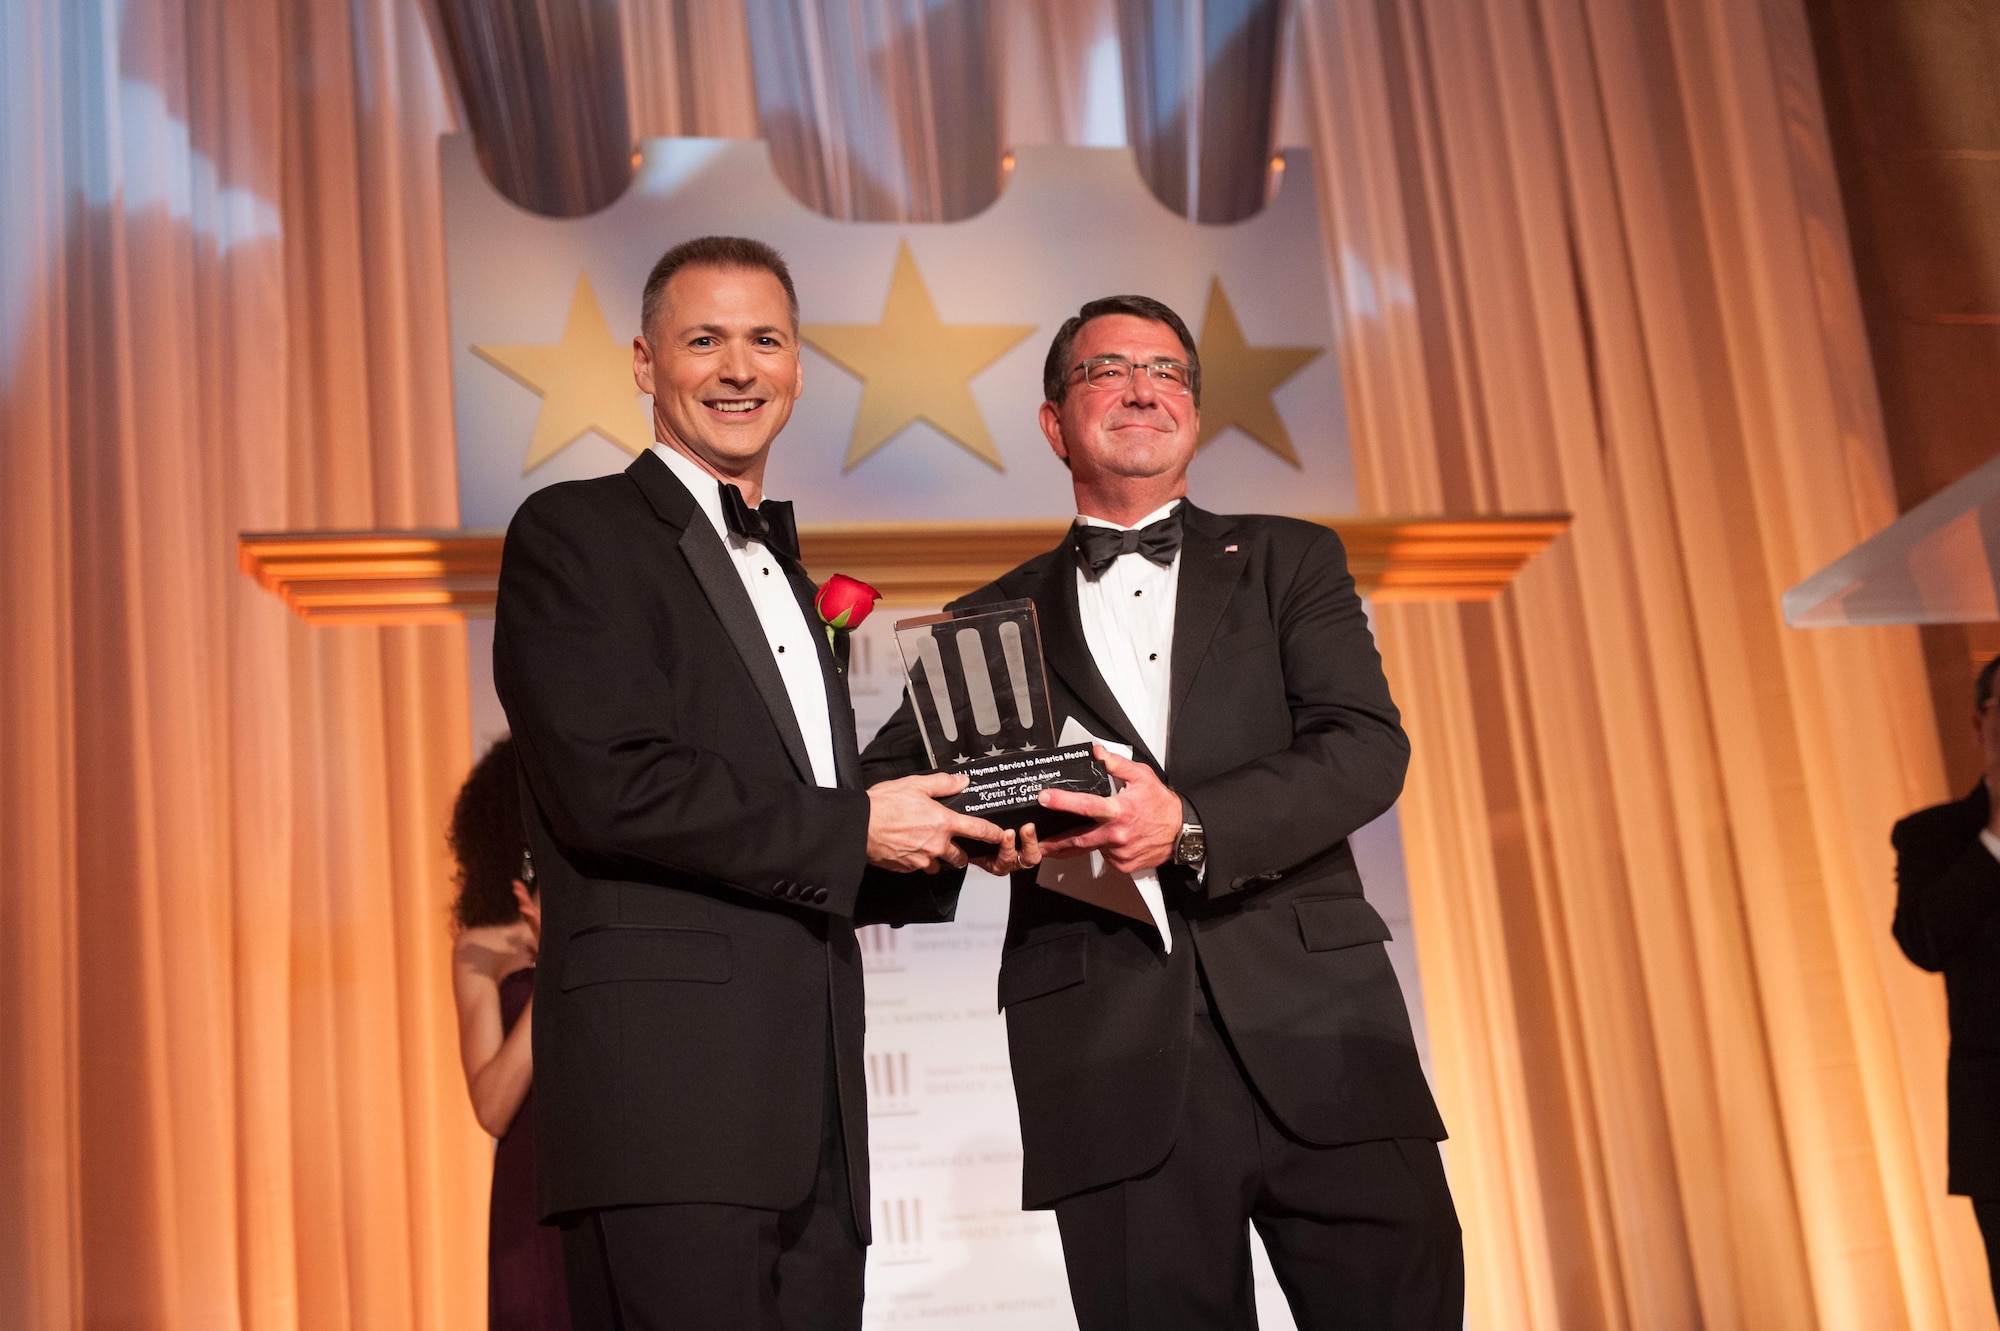 Department of the Air Force's Kevin Geiss (left) receives the 2013 Service to America Management Excellence Medal from Department of Defense Deputy Secretary Ashton Carter, Oct. 3, 2013 at the Andrew W. Mellon Auditorium in Washington, D.C. (Courtesy photo/Sam Kittner)
